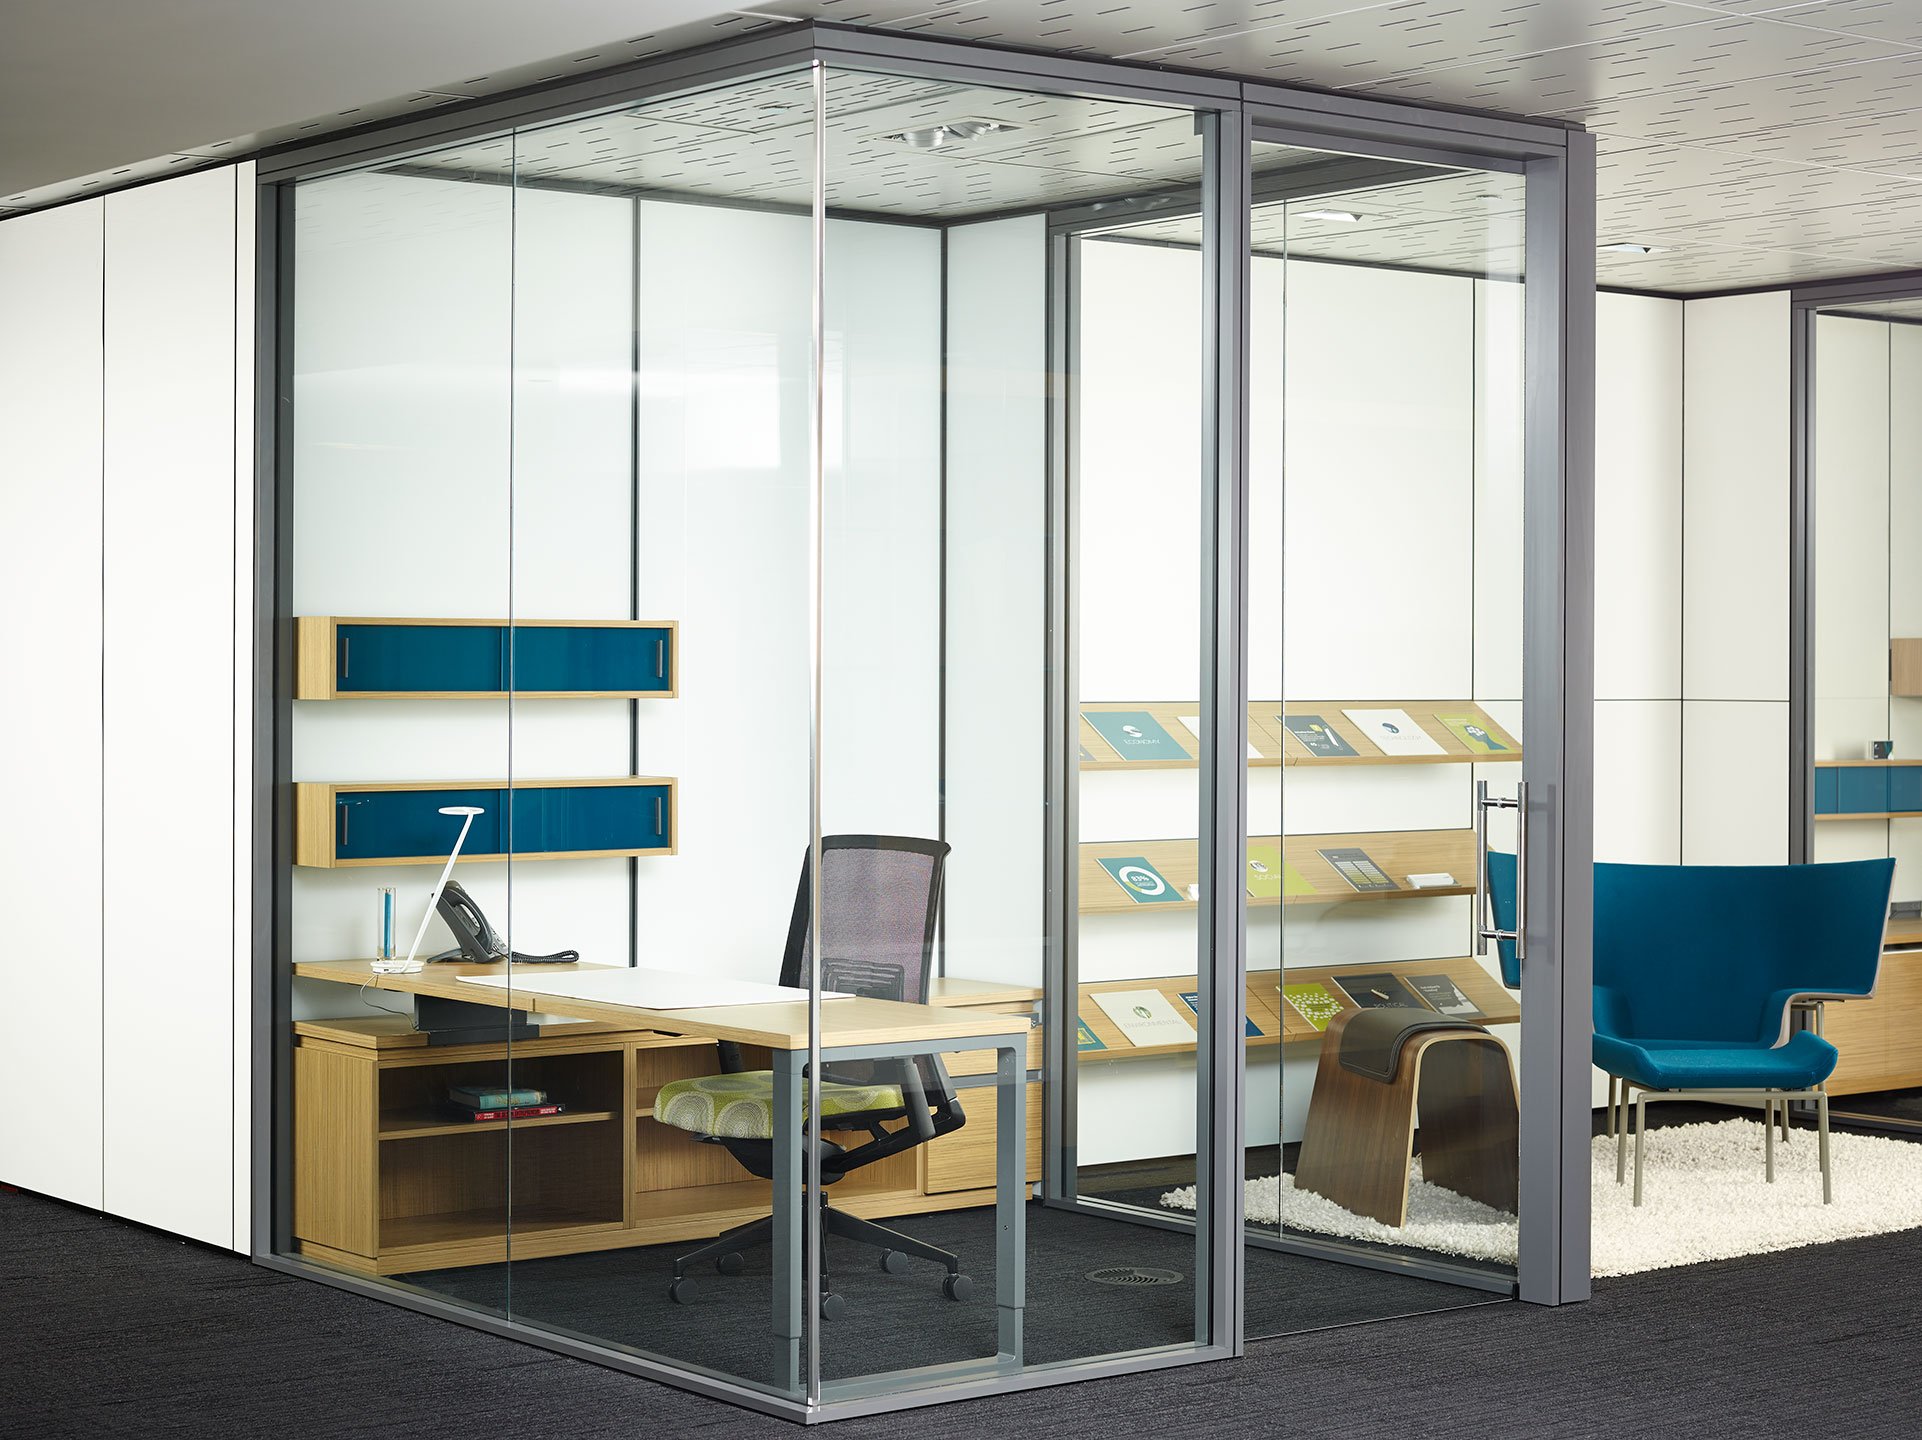 Haworth Enclose Frameless Glass Wall for private office space next to lounge area 